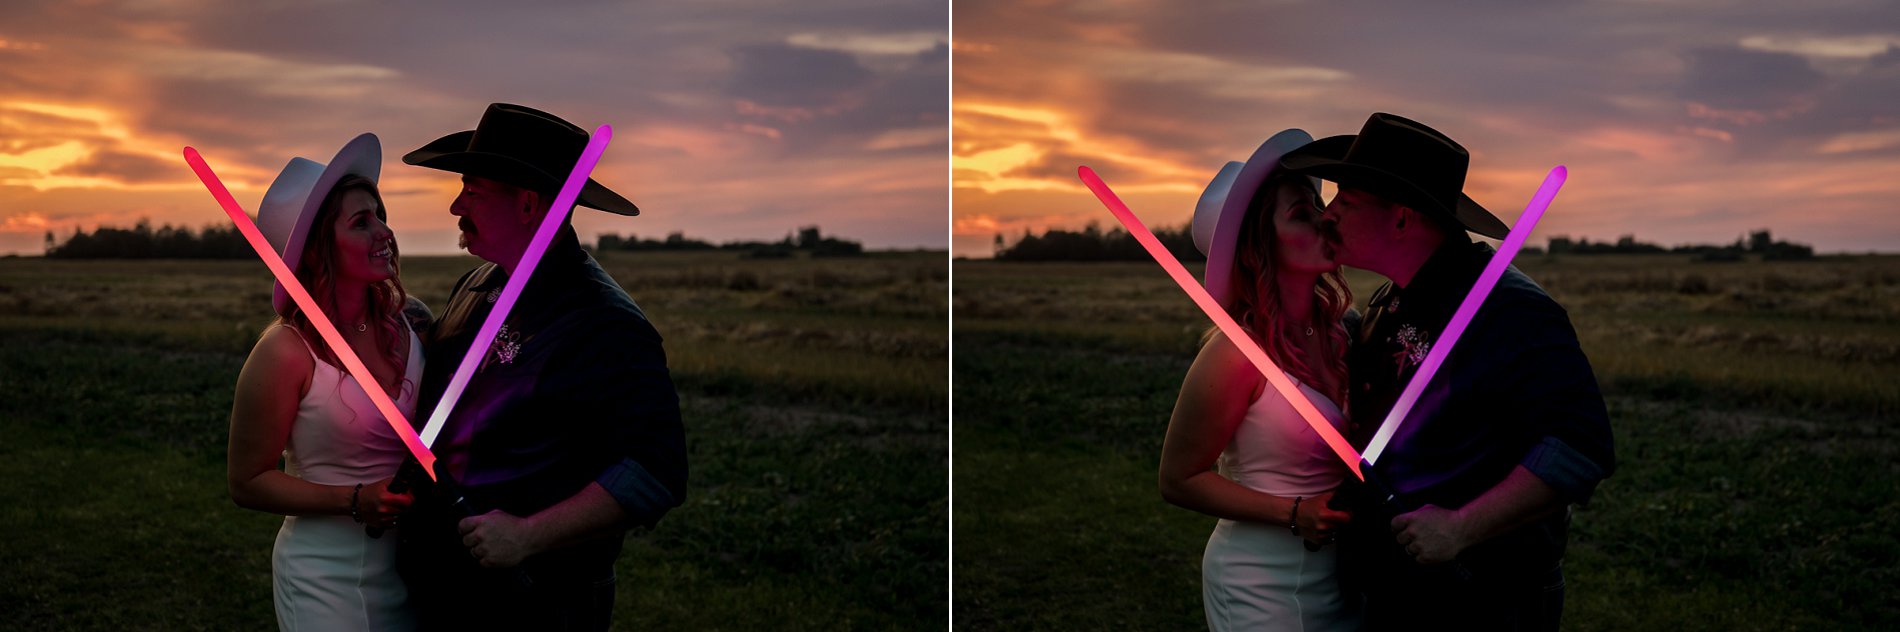 bride and groom pose with lightsabers at sunset